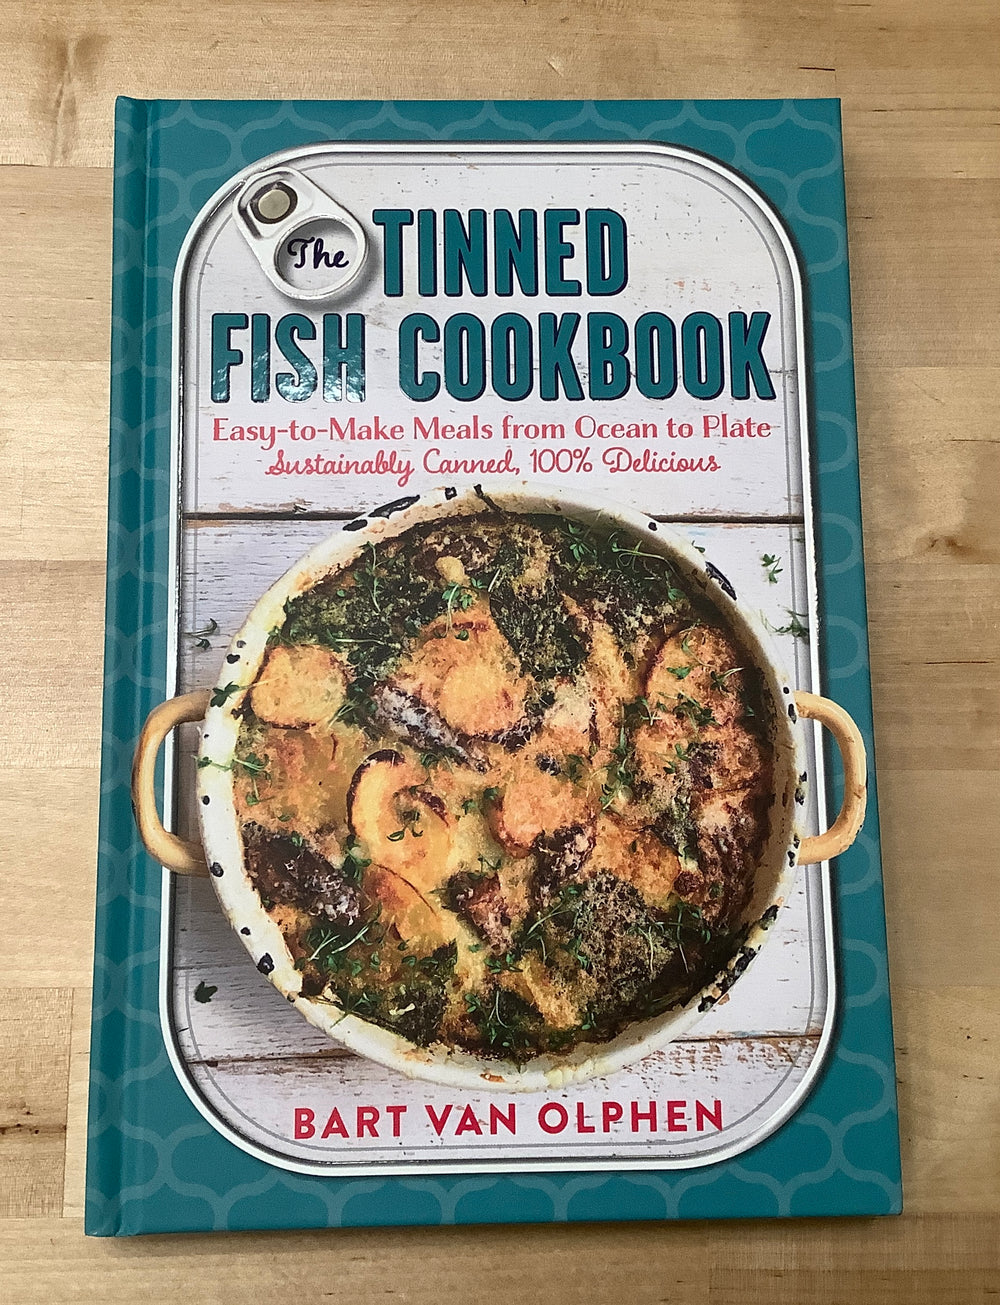 The Tinned Fish Cookbook by Bart Van Olphen